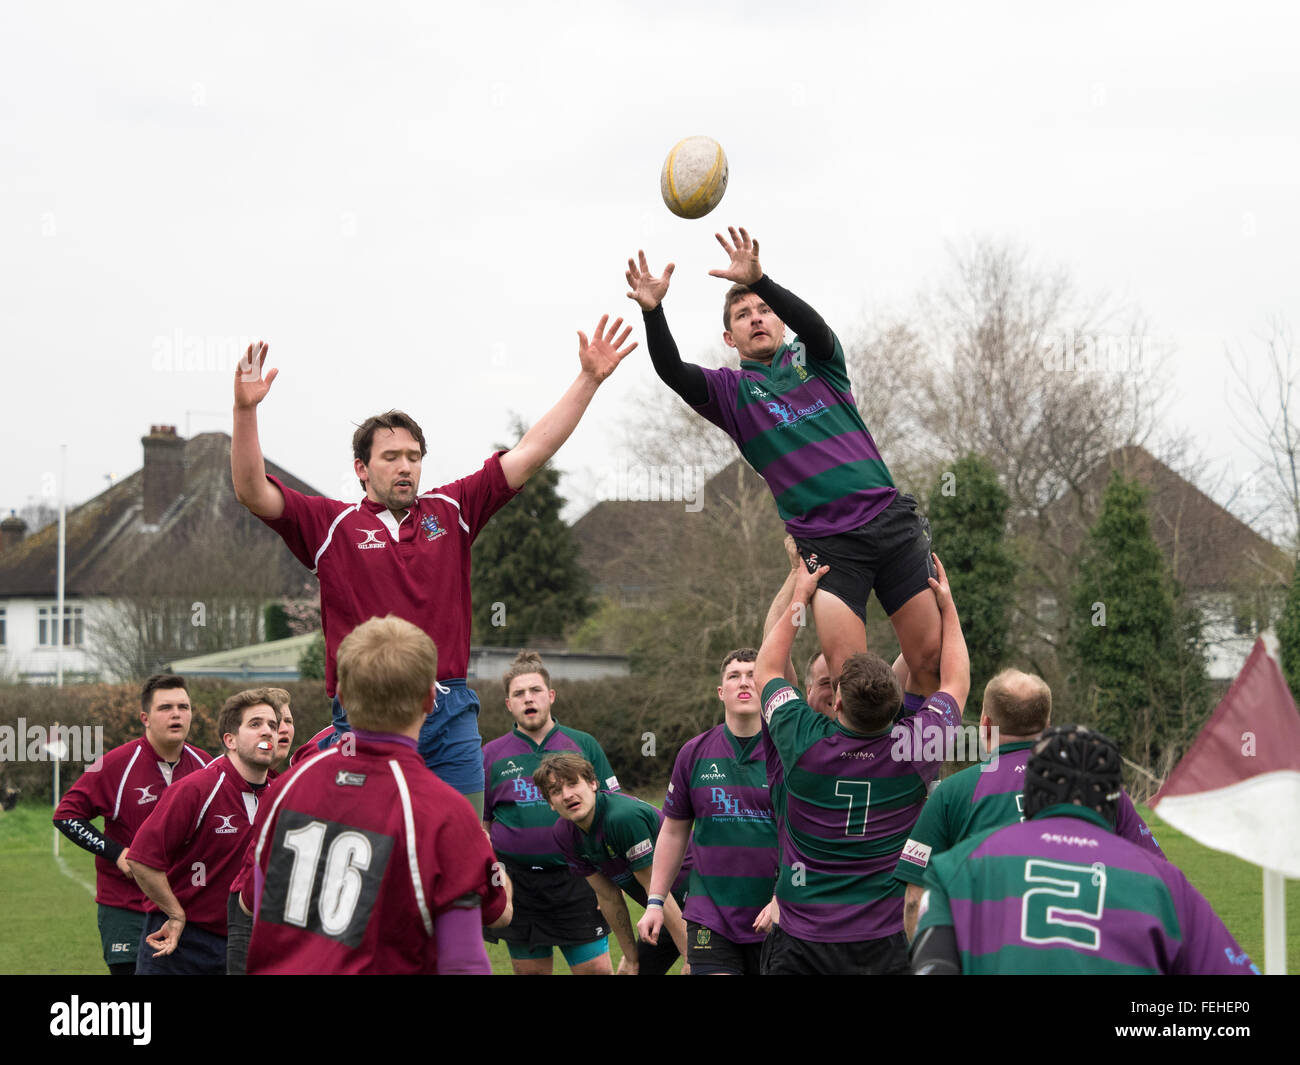 A line-out during a rugby match Stock Photo